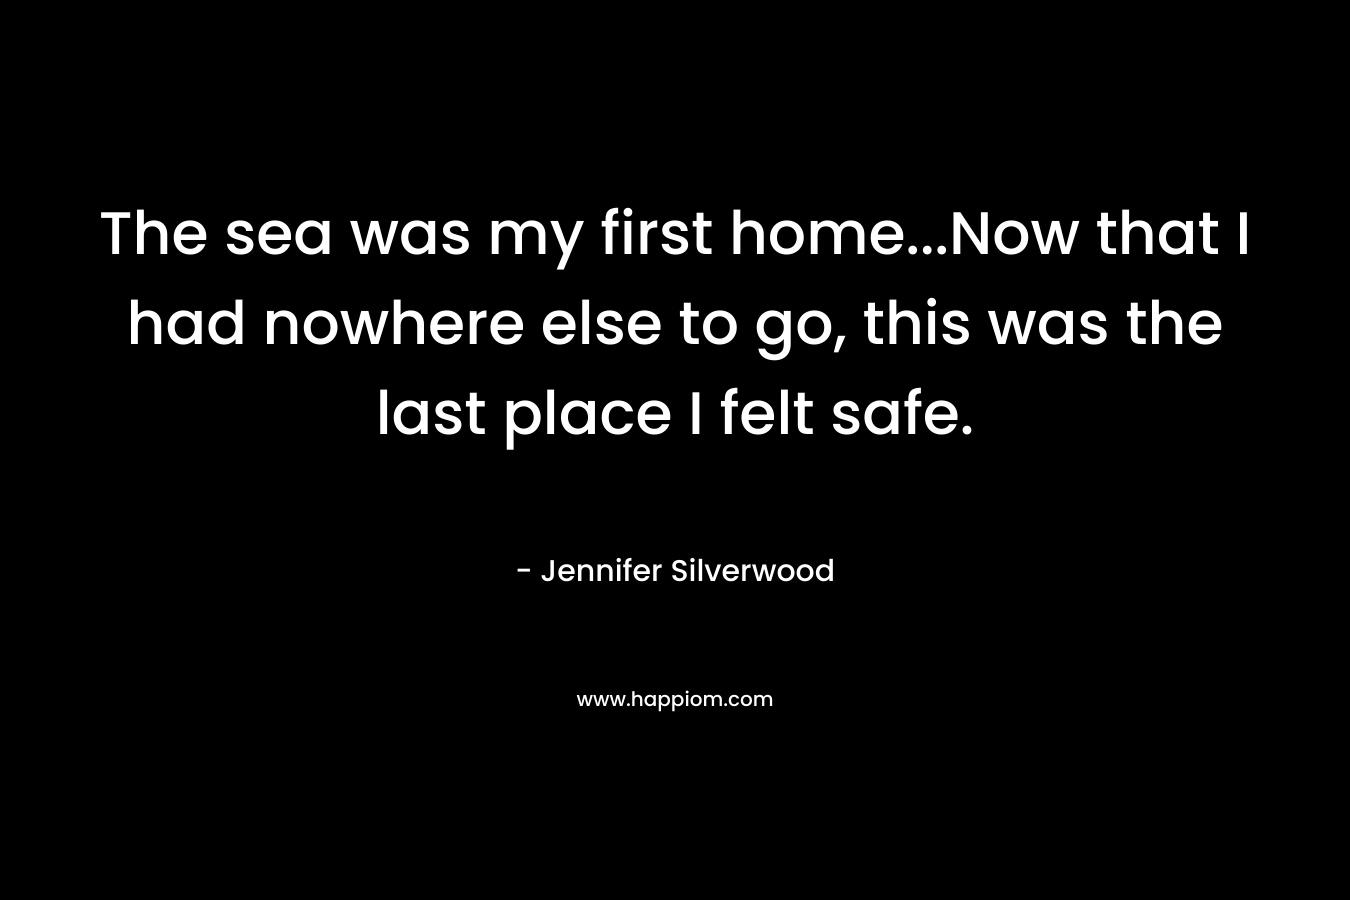 The sea was my first home…Now that I had nowhere else to go, this was the last place I felt safe. – Jennifer Silverwood